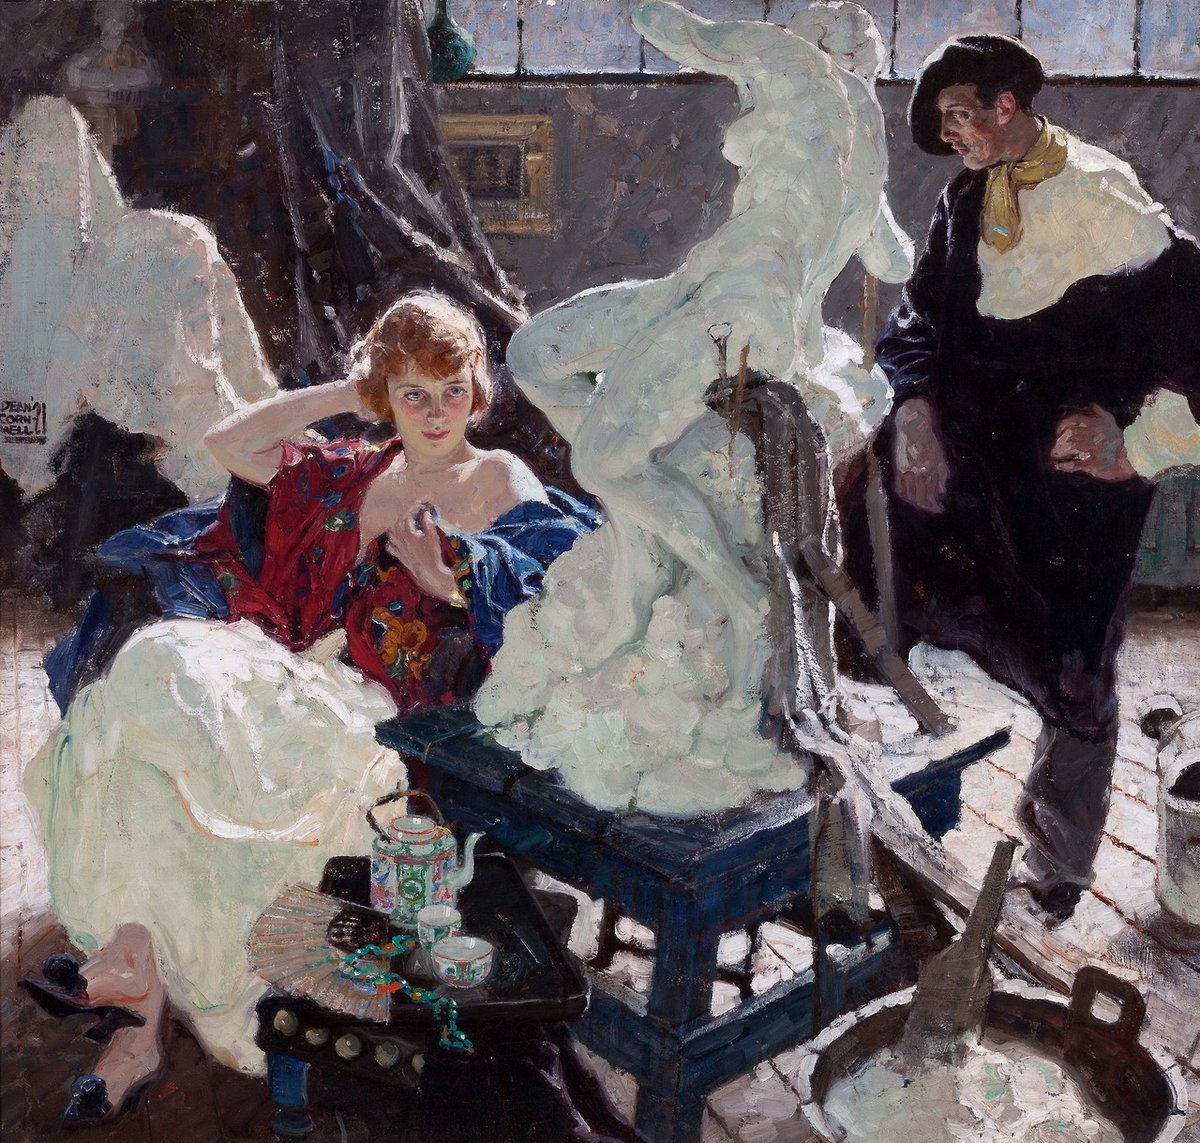 Dean Cornwell. 'The Artist and his Model'